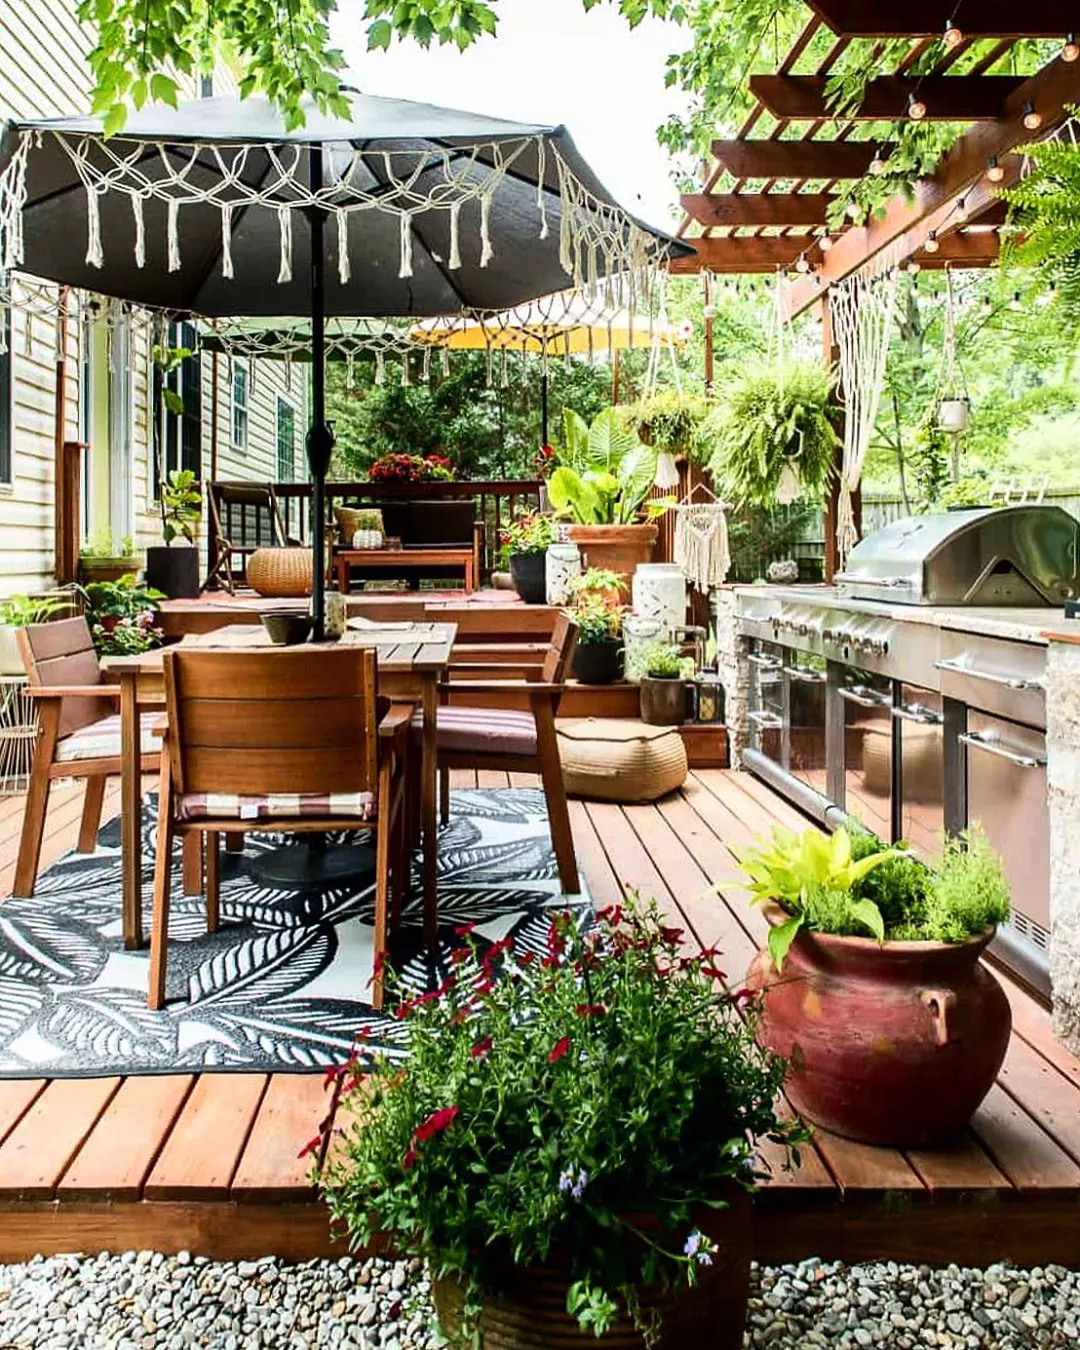 Creating a Functional and Fabulous Outdoor Kitchen for